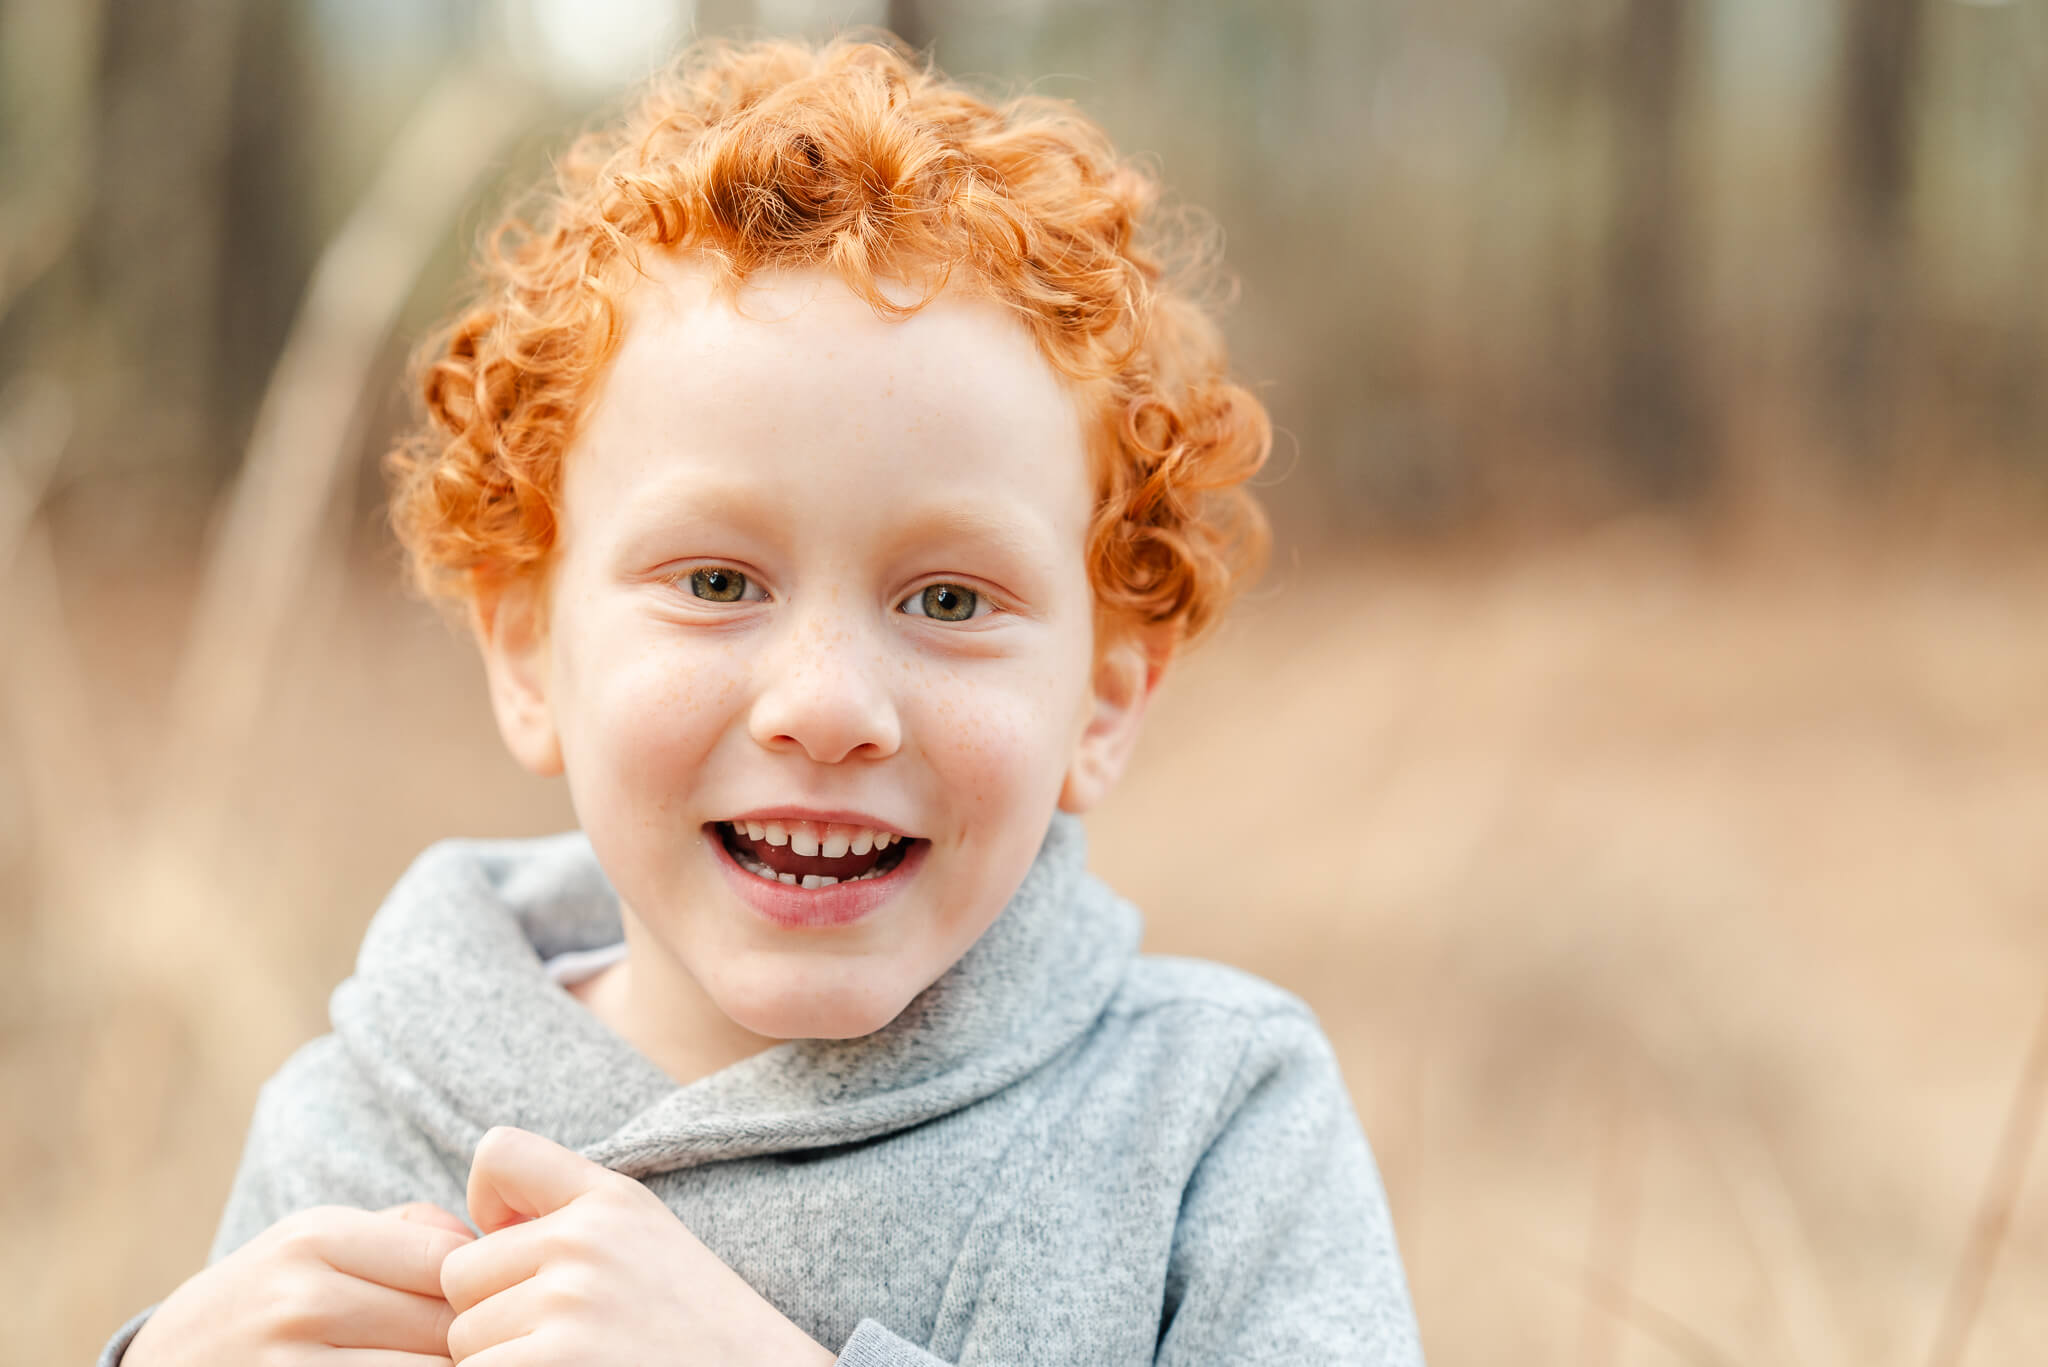 A young boy with shows off his red curls that display an example of a kids haircut in Chesapeake. He is wearing a gray sweater and smiling for the camera.